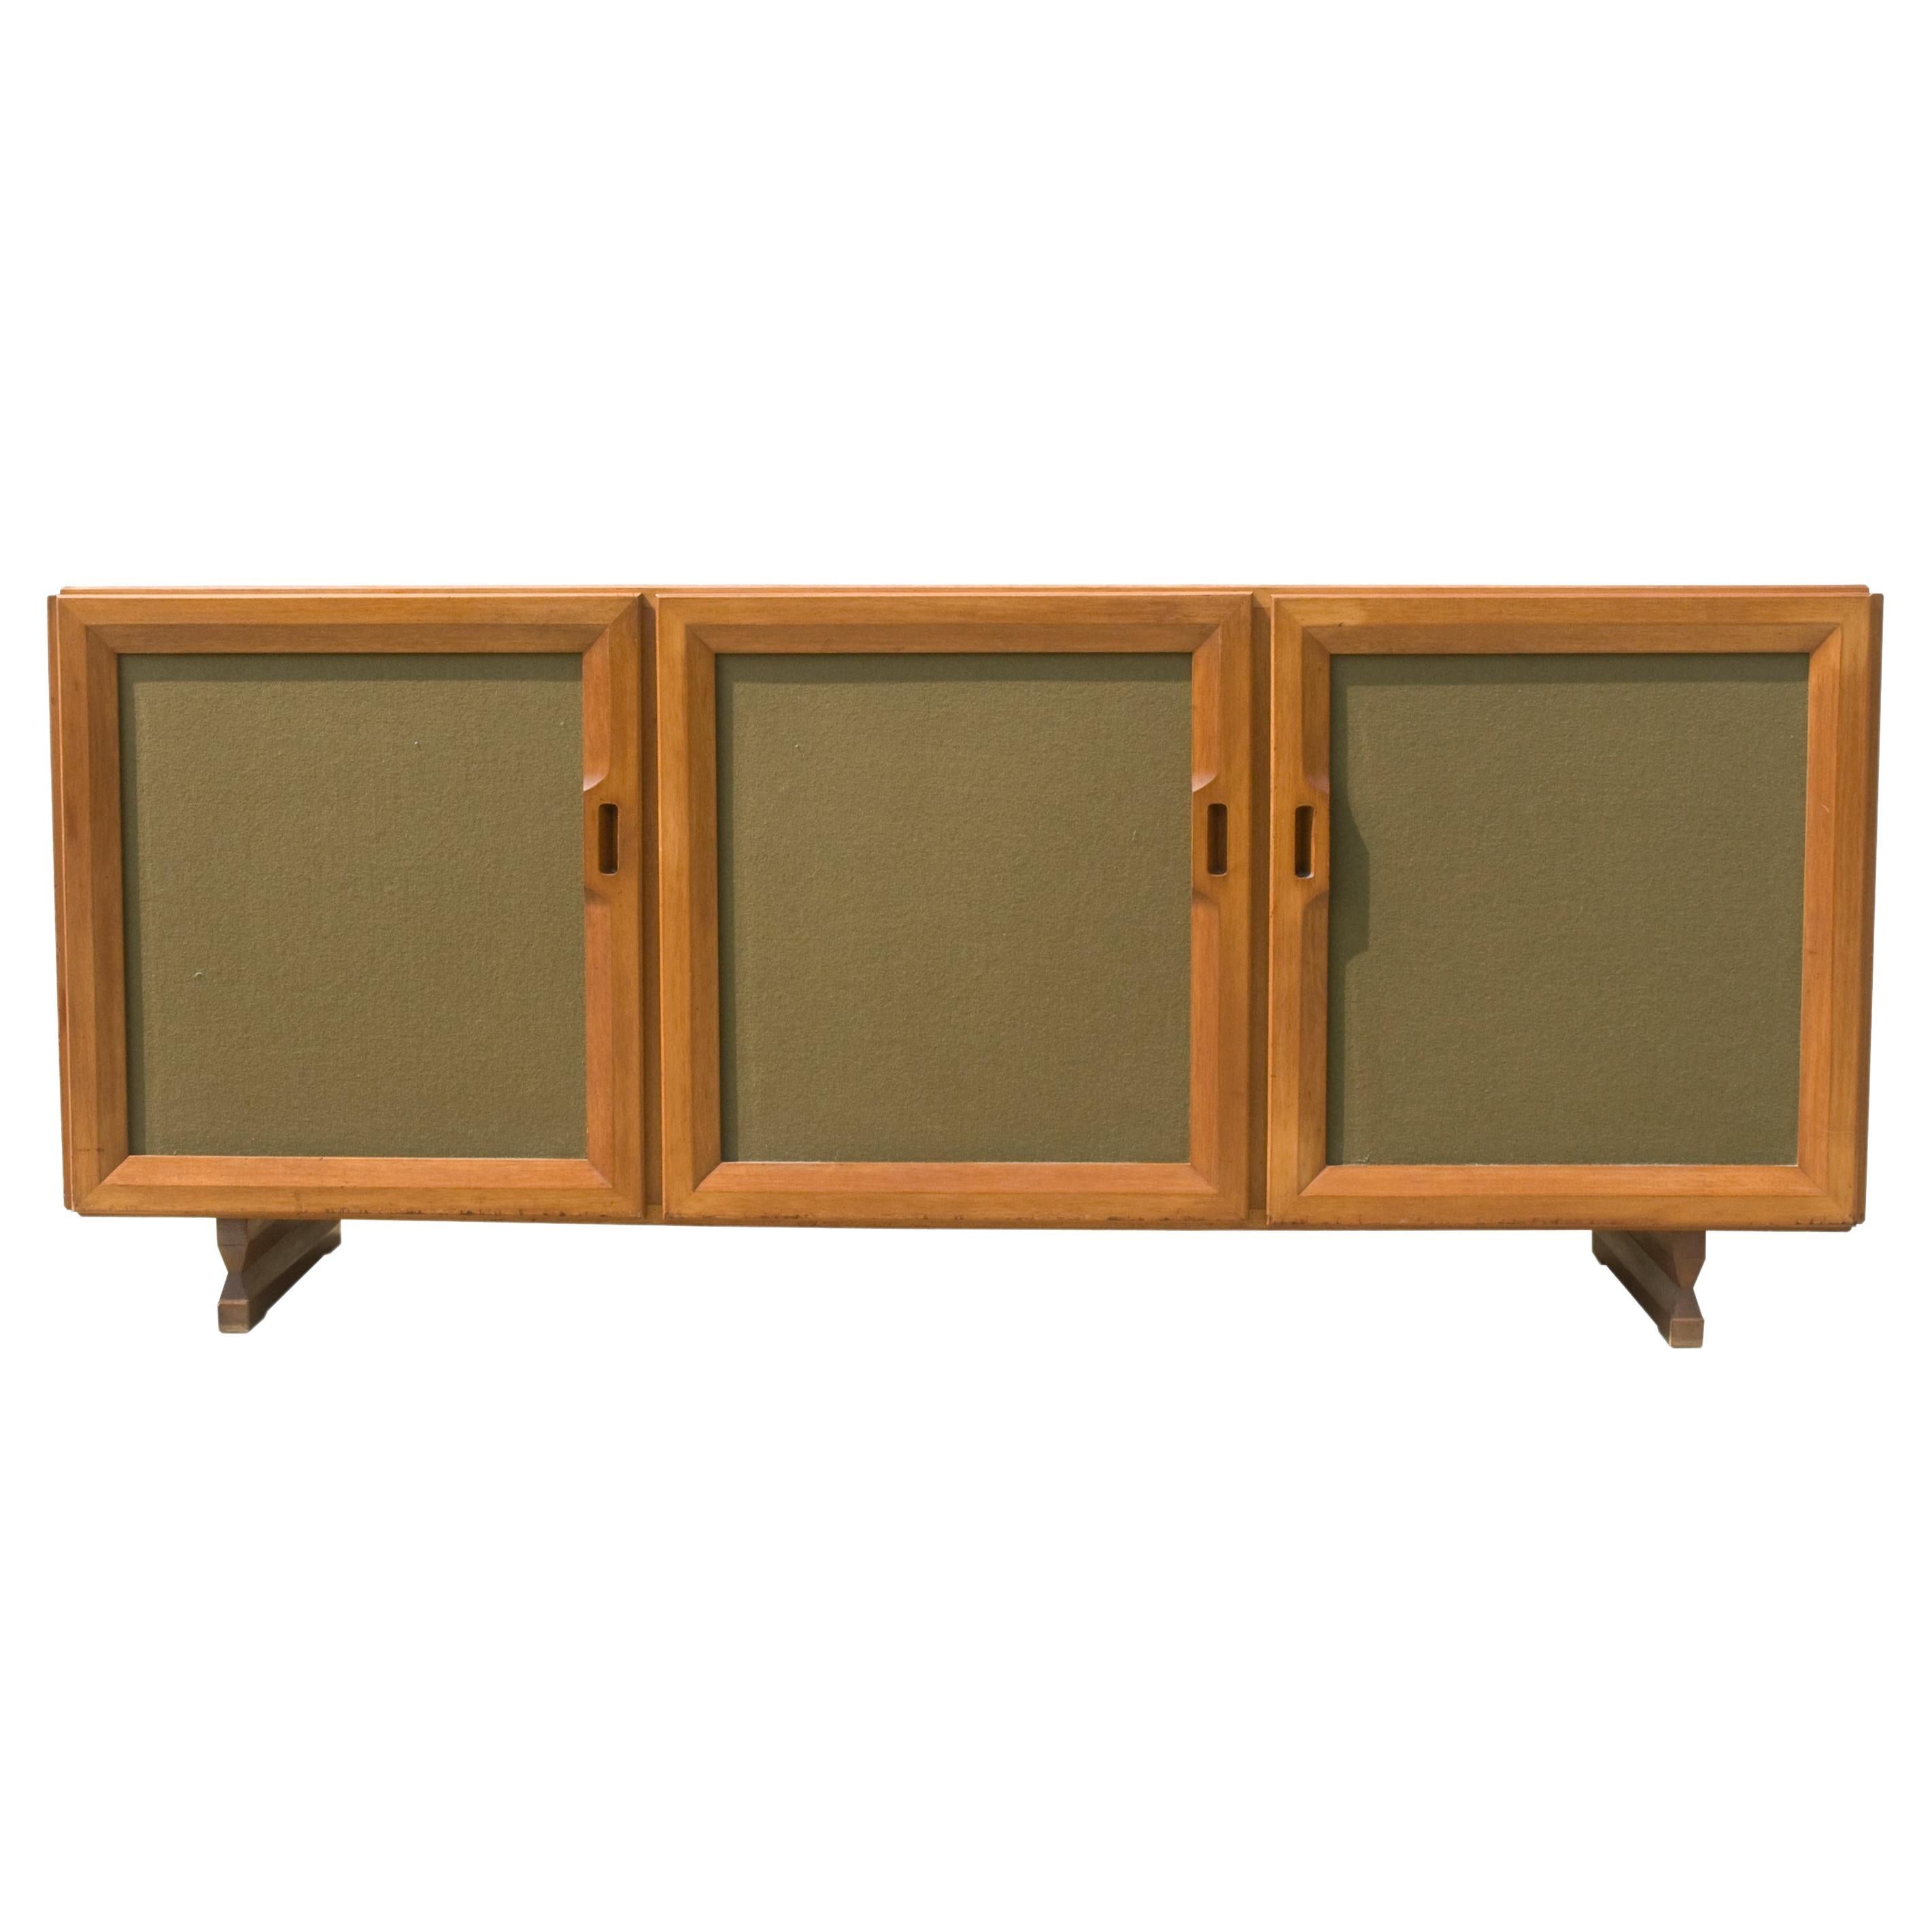 Walnut & olive green fabric 1950s MB 15 Sideboard by Albini & Helg for Poggi